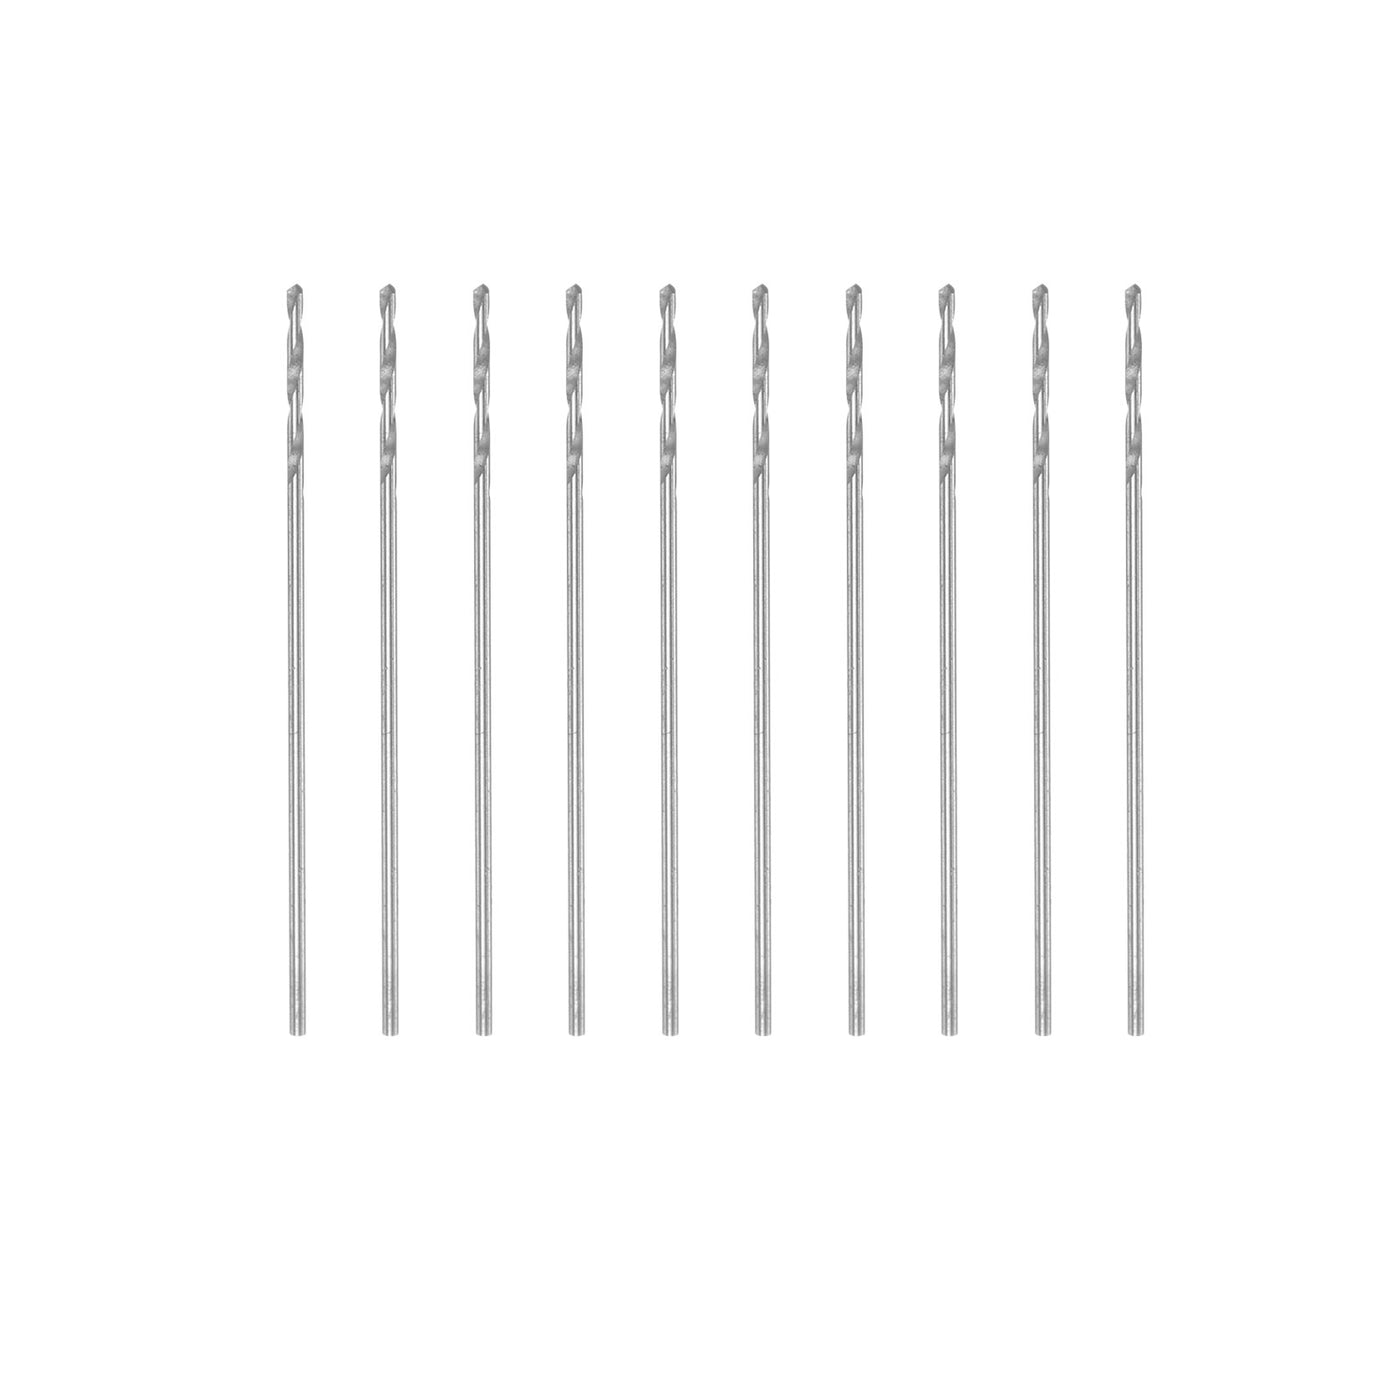 uxcell Uxcell 10 Pcs 0.55mm High Speed Steel Drill Bits, Fully Ground 24mm Length Drill Bit